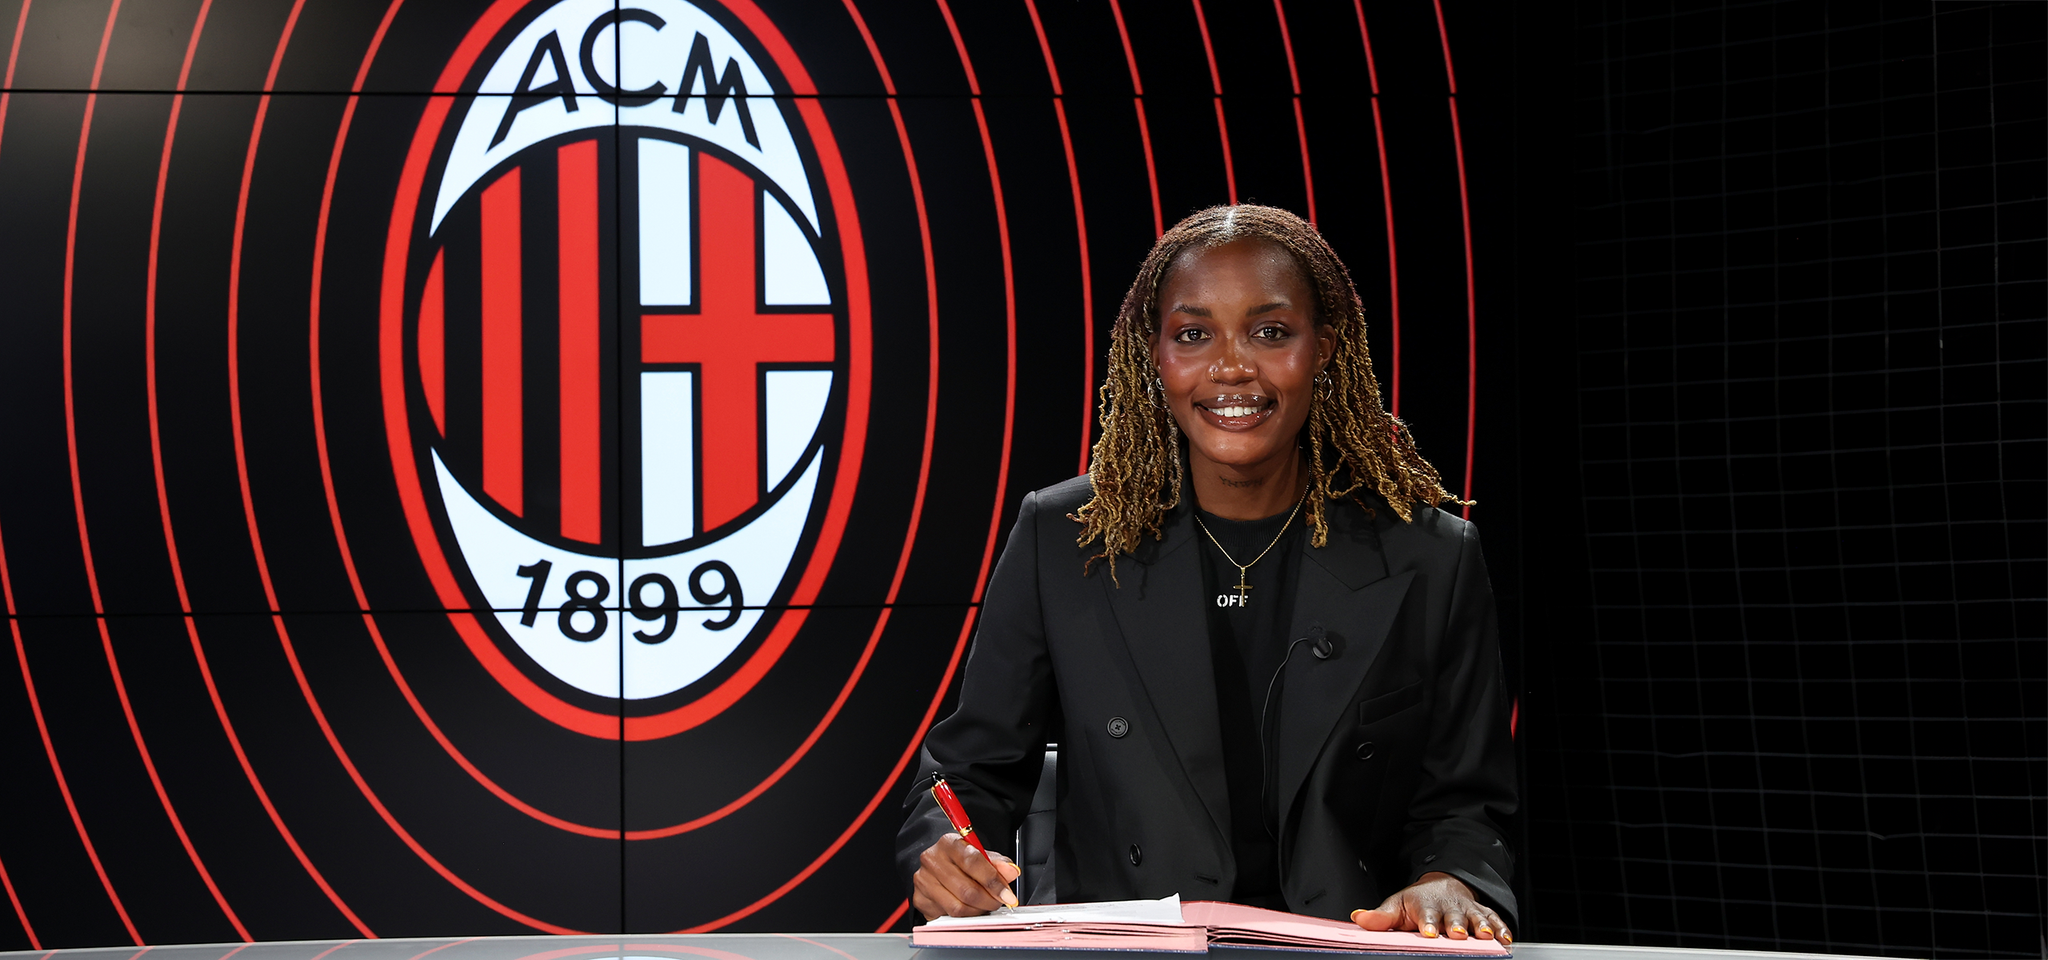 AC Milan confirm permanent transfer of Evelyn Ijeh